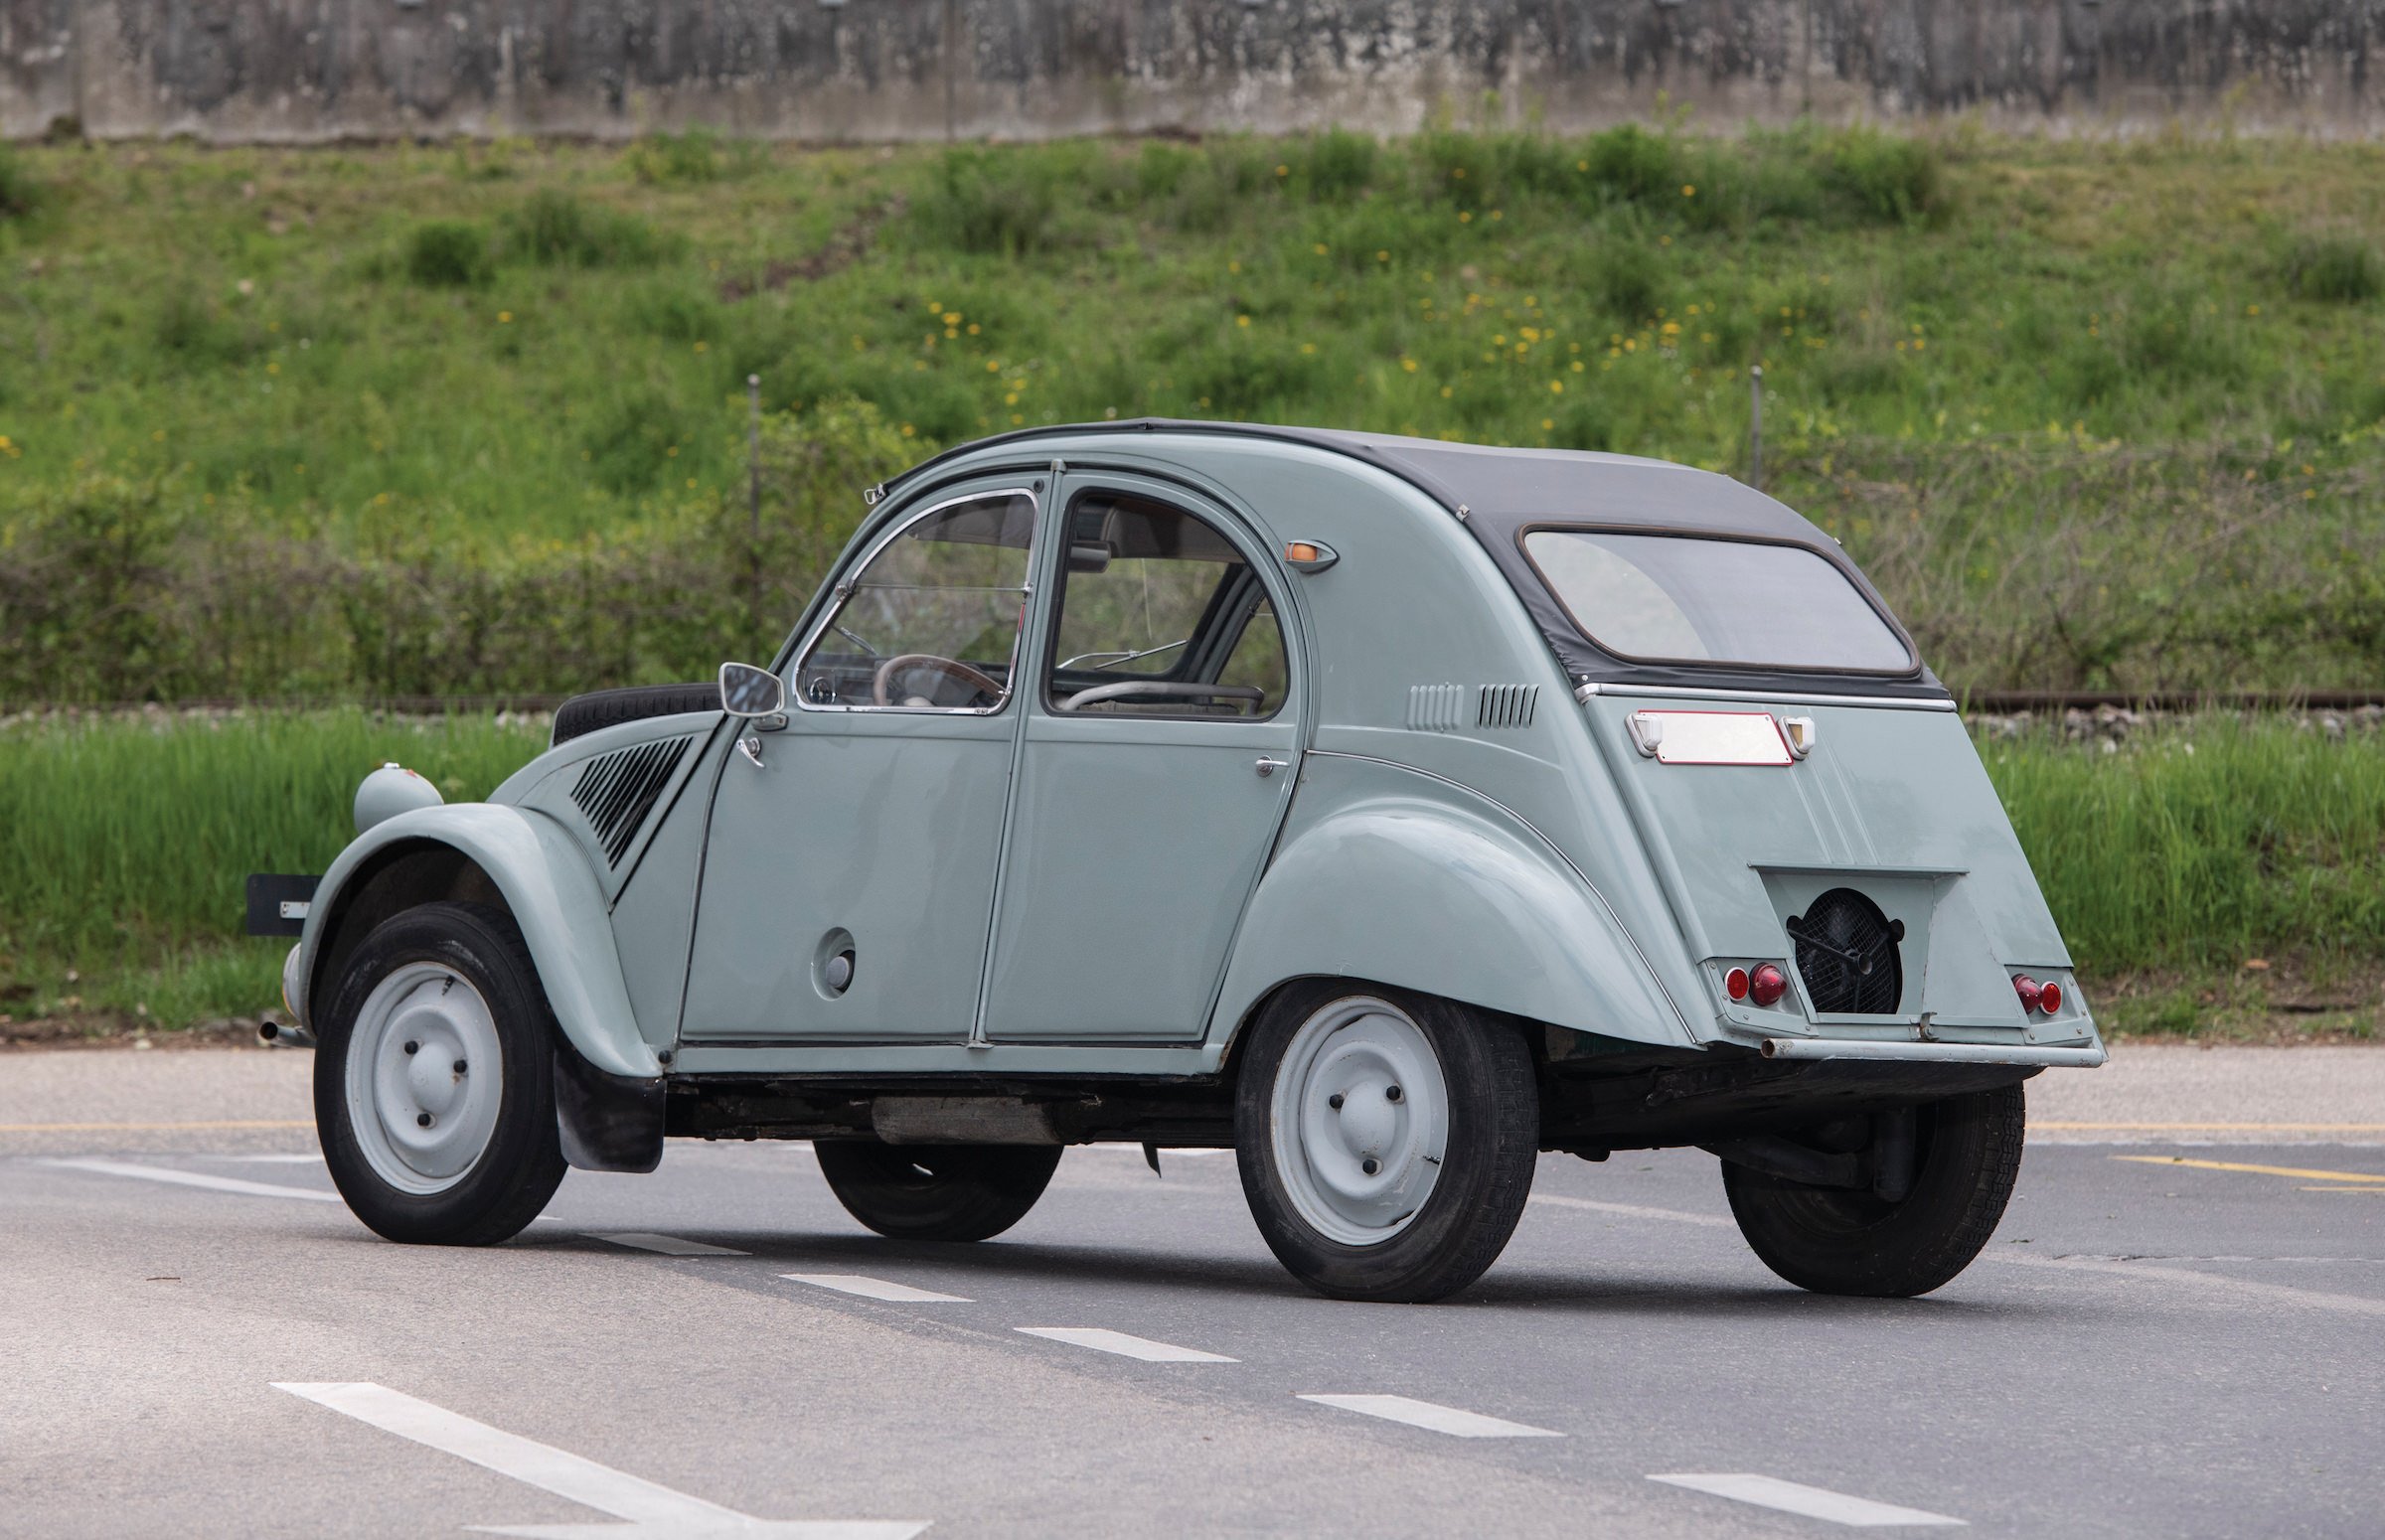 The Citroen 2cv 4x4 Sahara The Unstoppable French Answer To The Land Rover